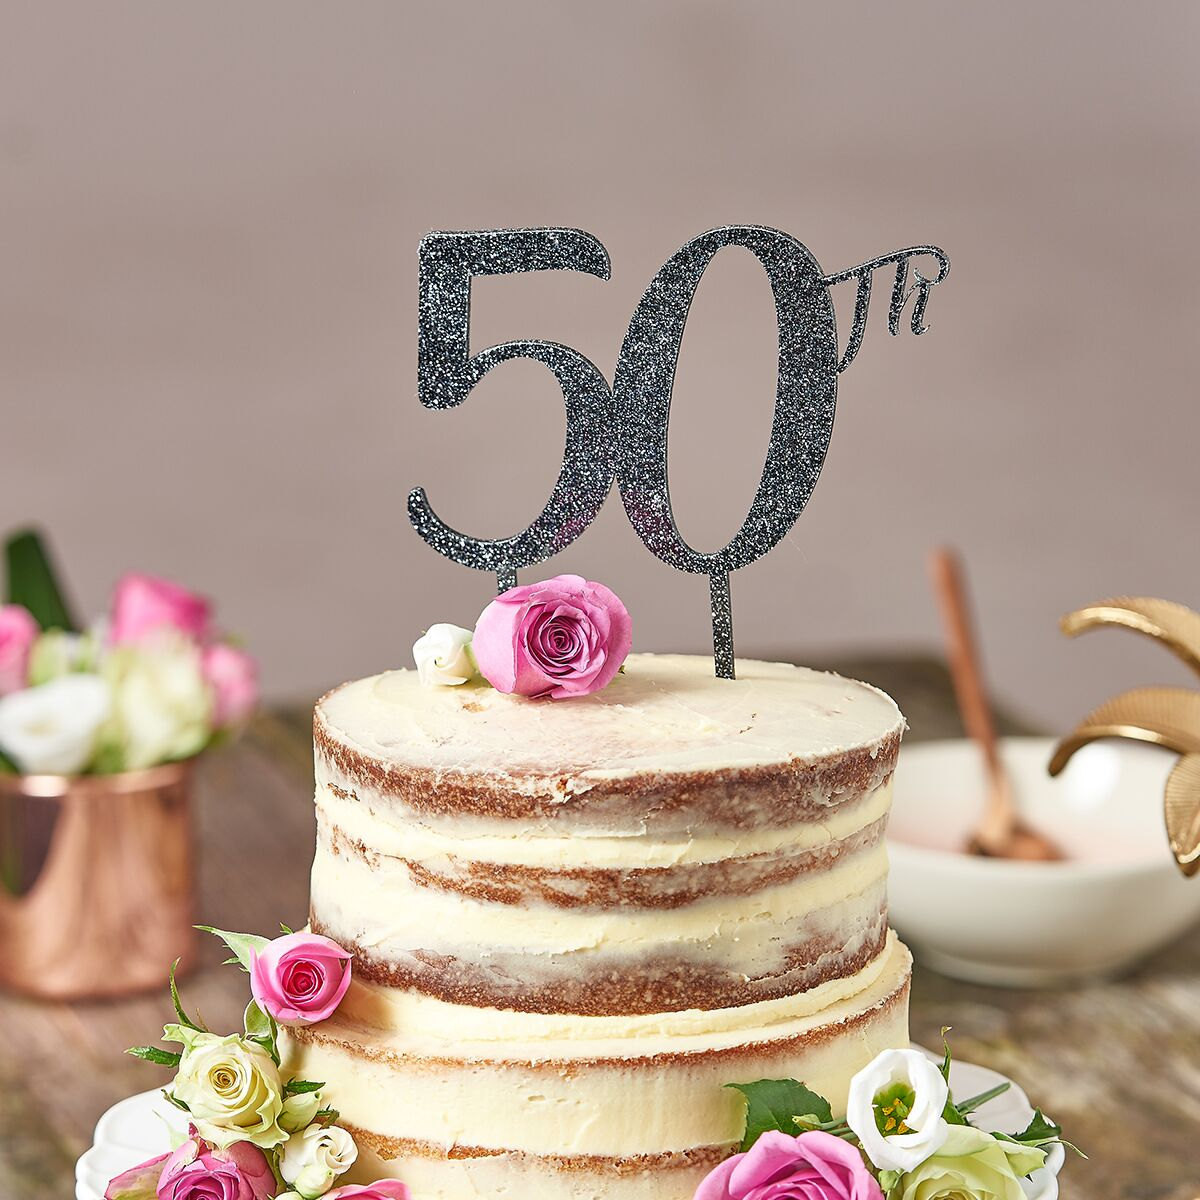 50th Birthday Cake Images
 50th Birthday Cake Topper cake topper for 50th